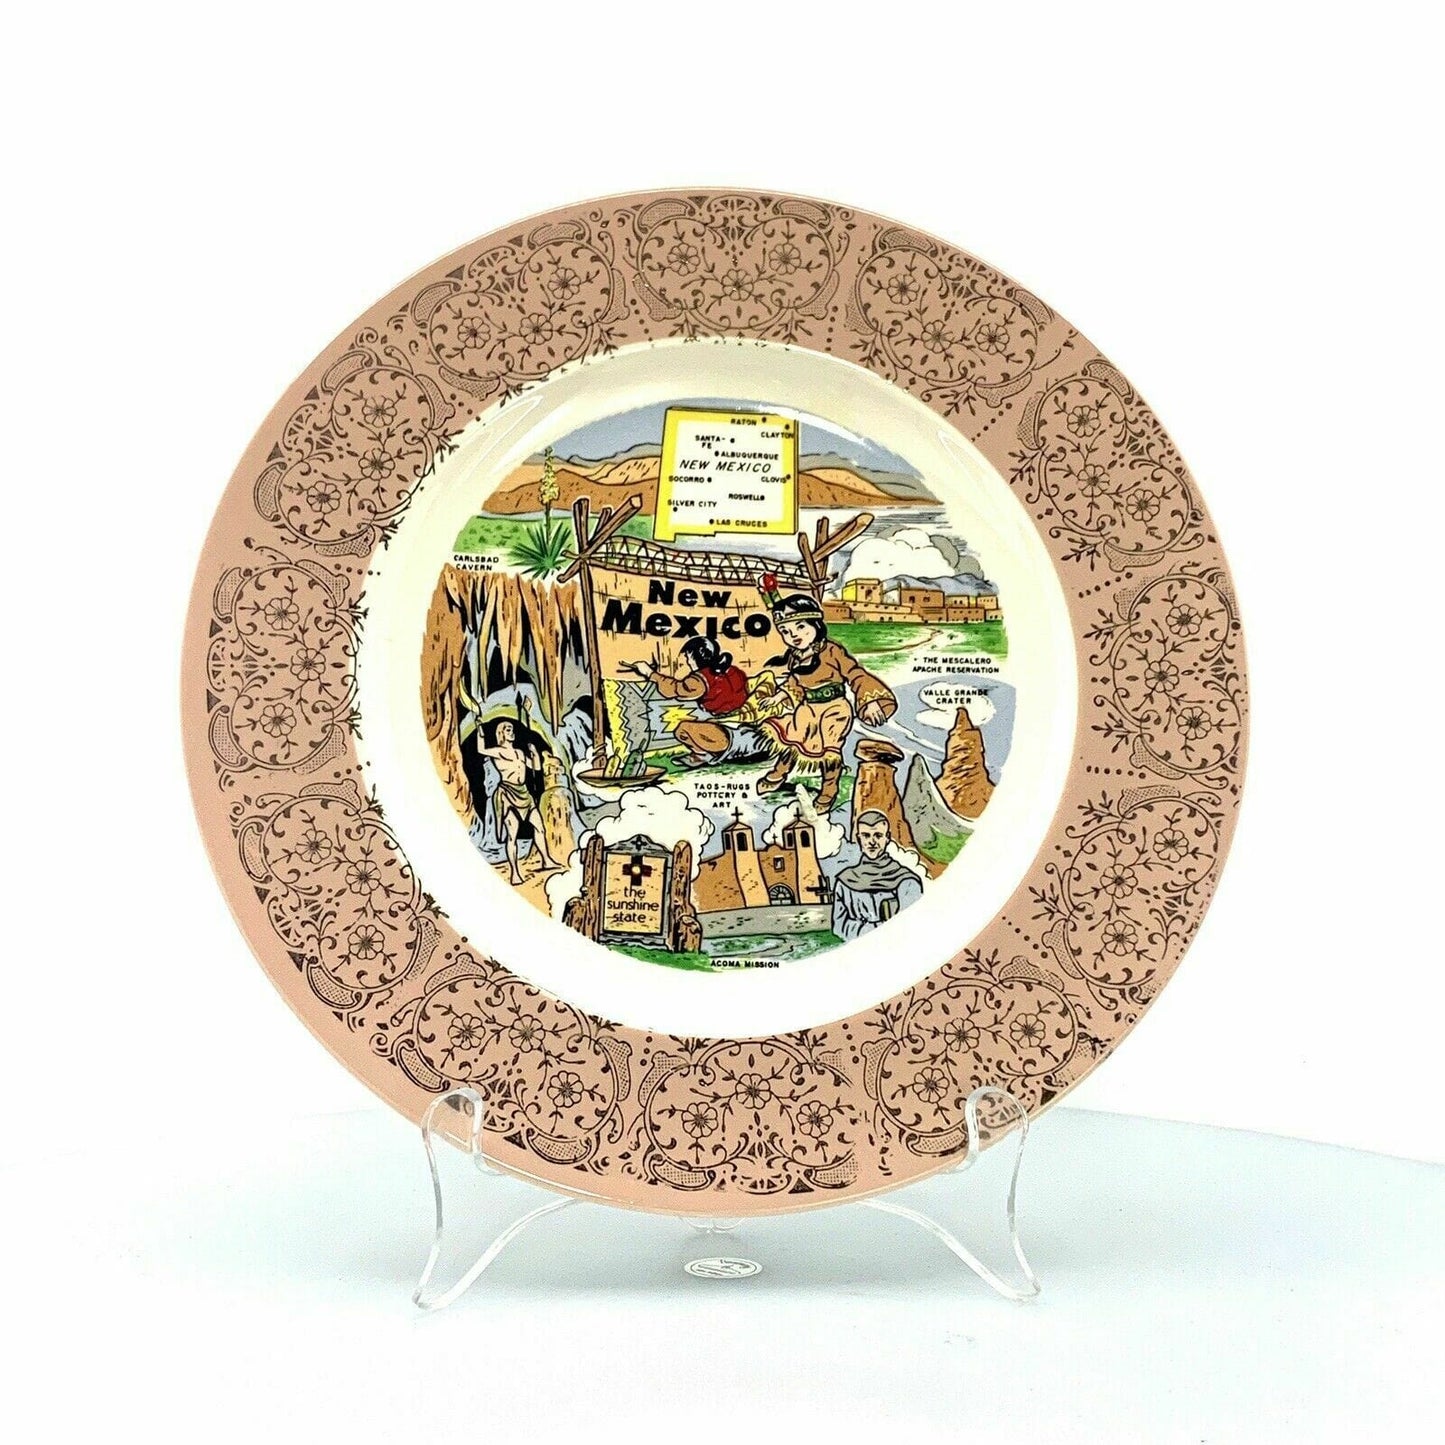 State Of New Mexico Souvenir Collectible Plate, White - 9.5”